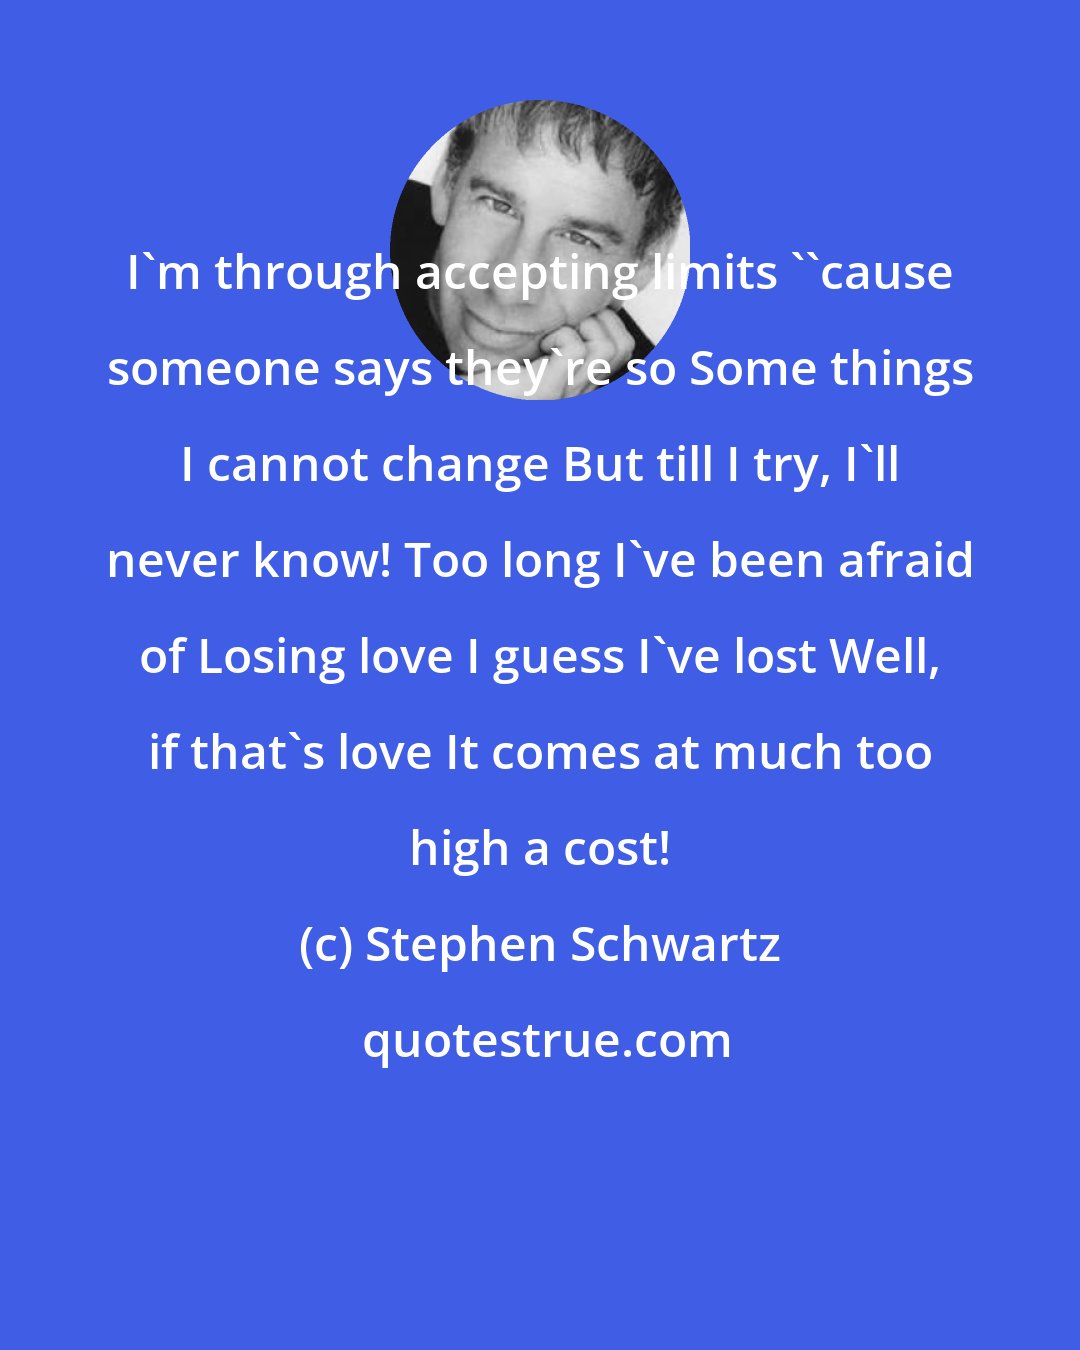 Stephen Schwartz: I'm through accepting limits ''cause someone says they're so Some things I cannot change But till I try, I'll never know! Too long I've been afraid of Losing love I guess I've lost Well, if that's love It comes at much too high a cost!